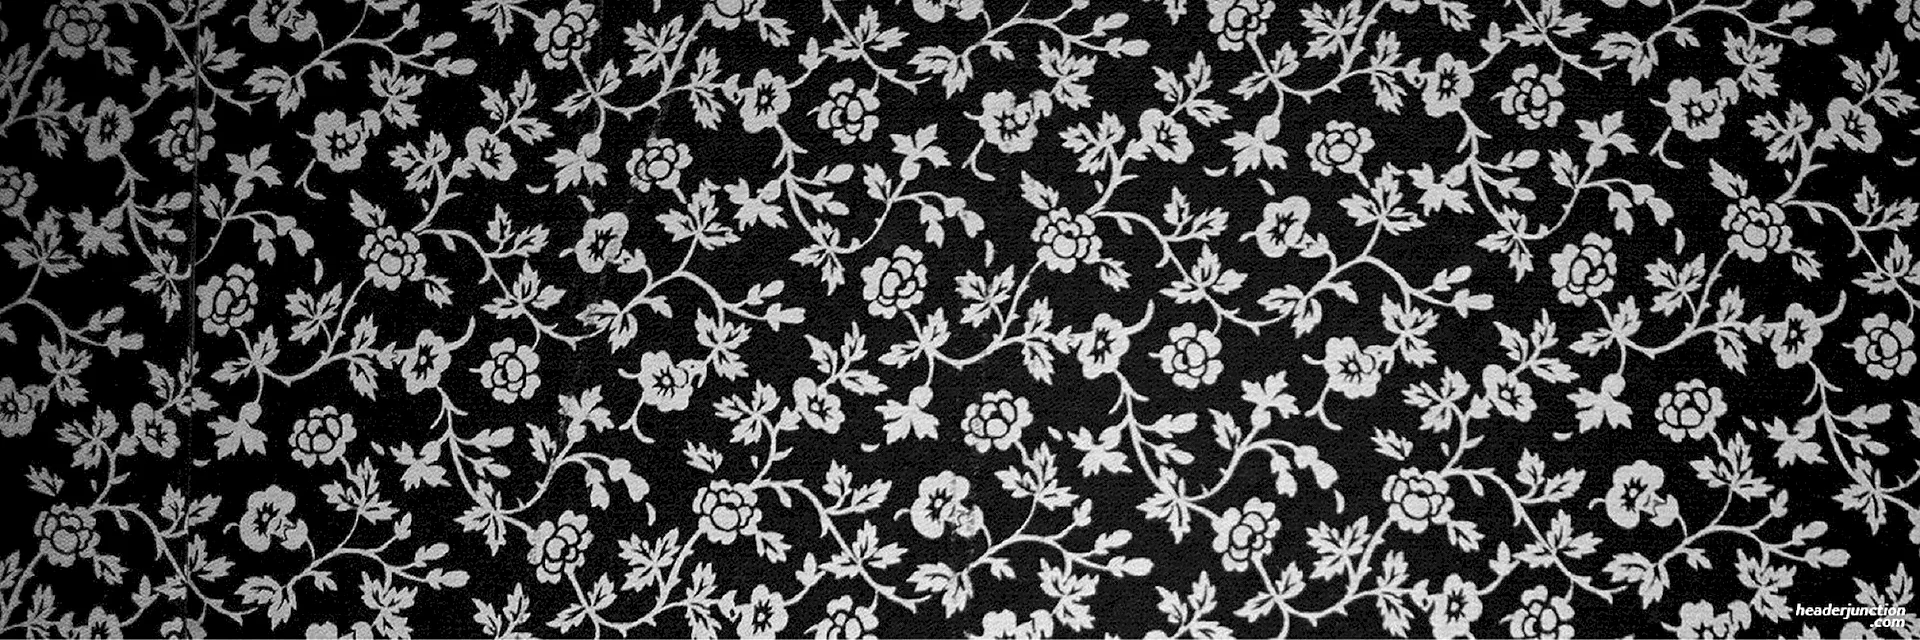 Black And White Floral Pattern Wallpaper